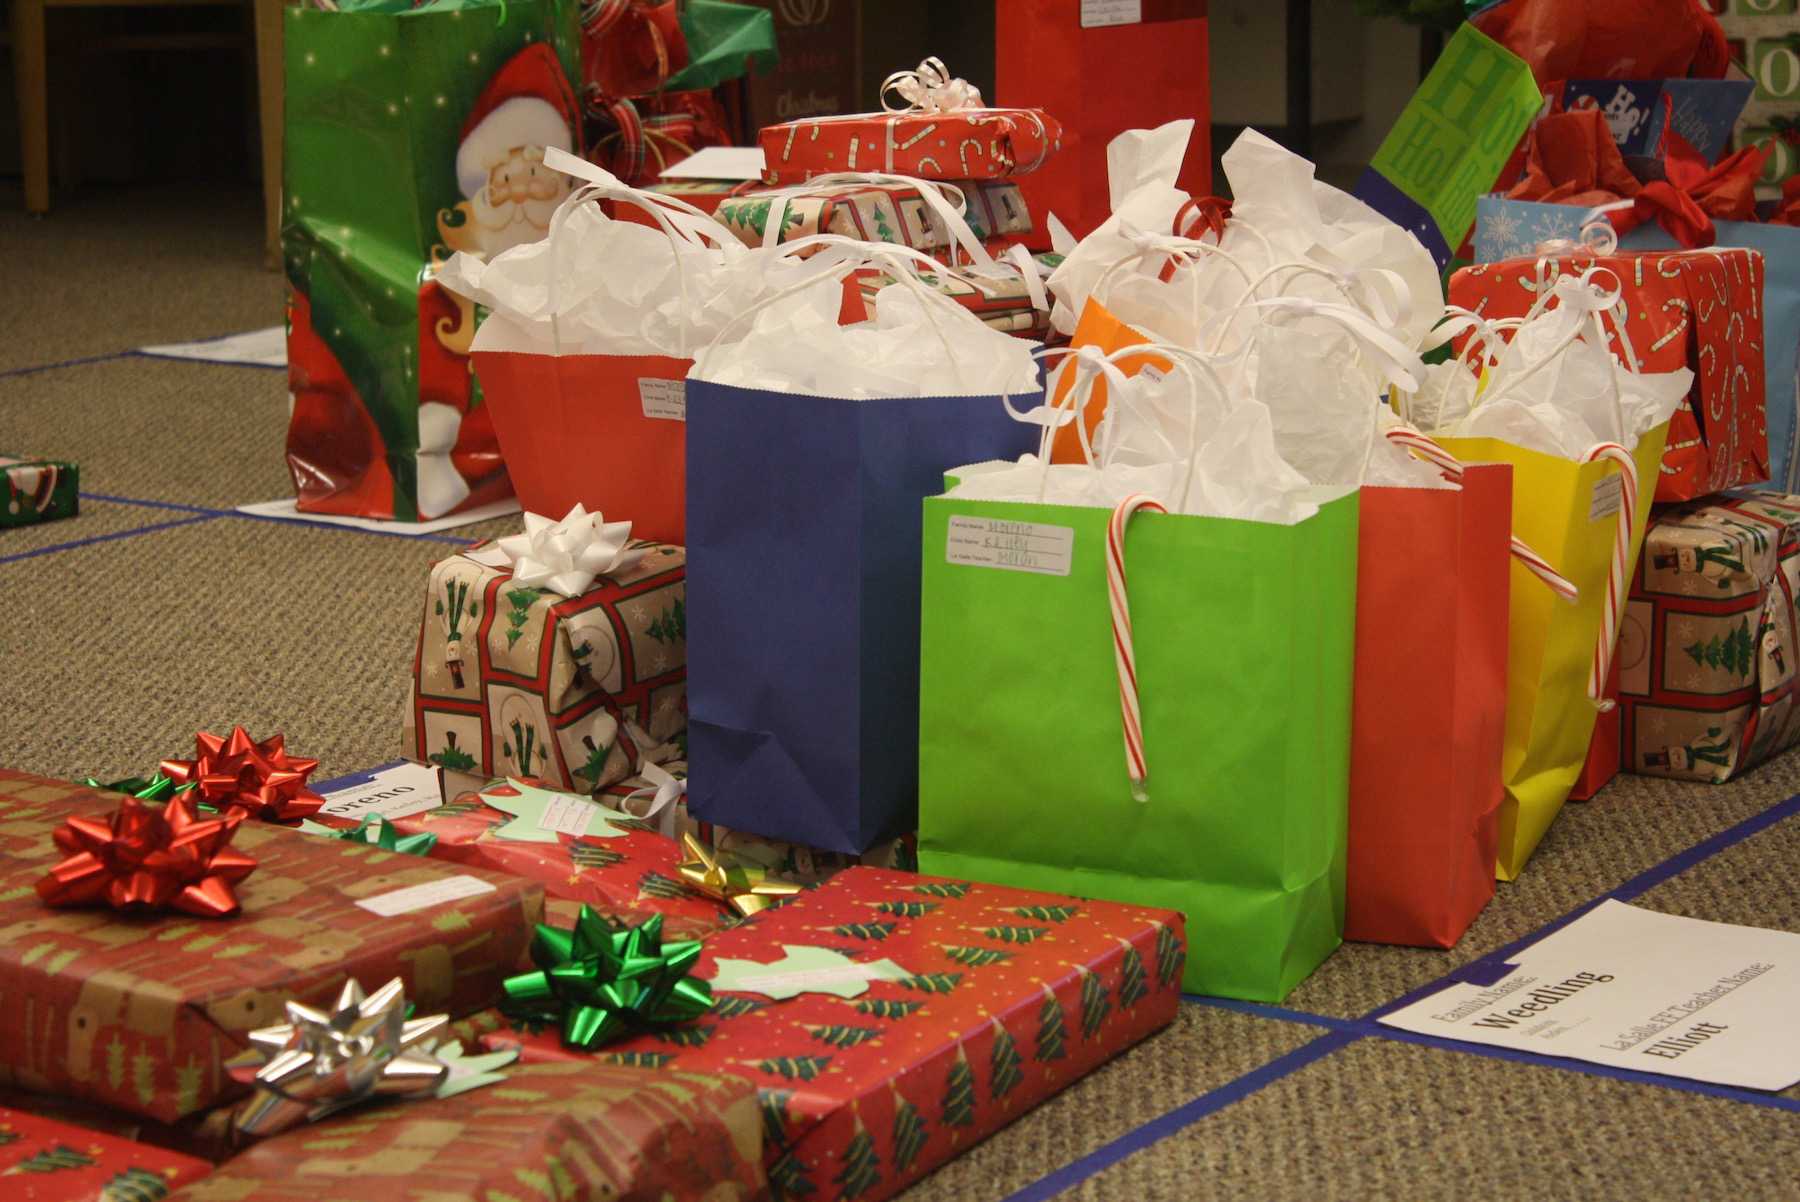 Elves+Wrap+Presents+for+Lot+Whitcomb+Families